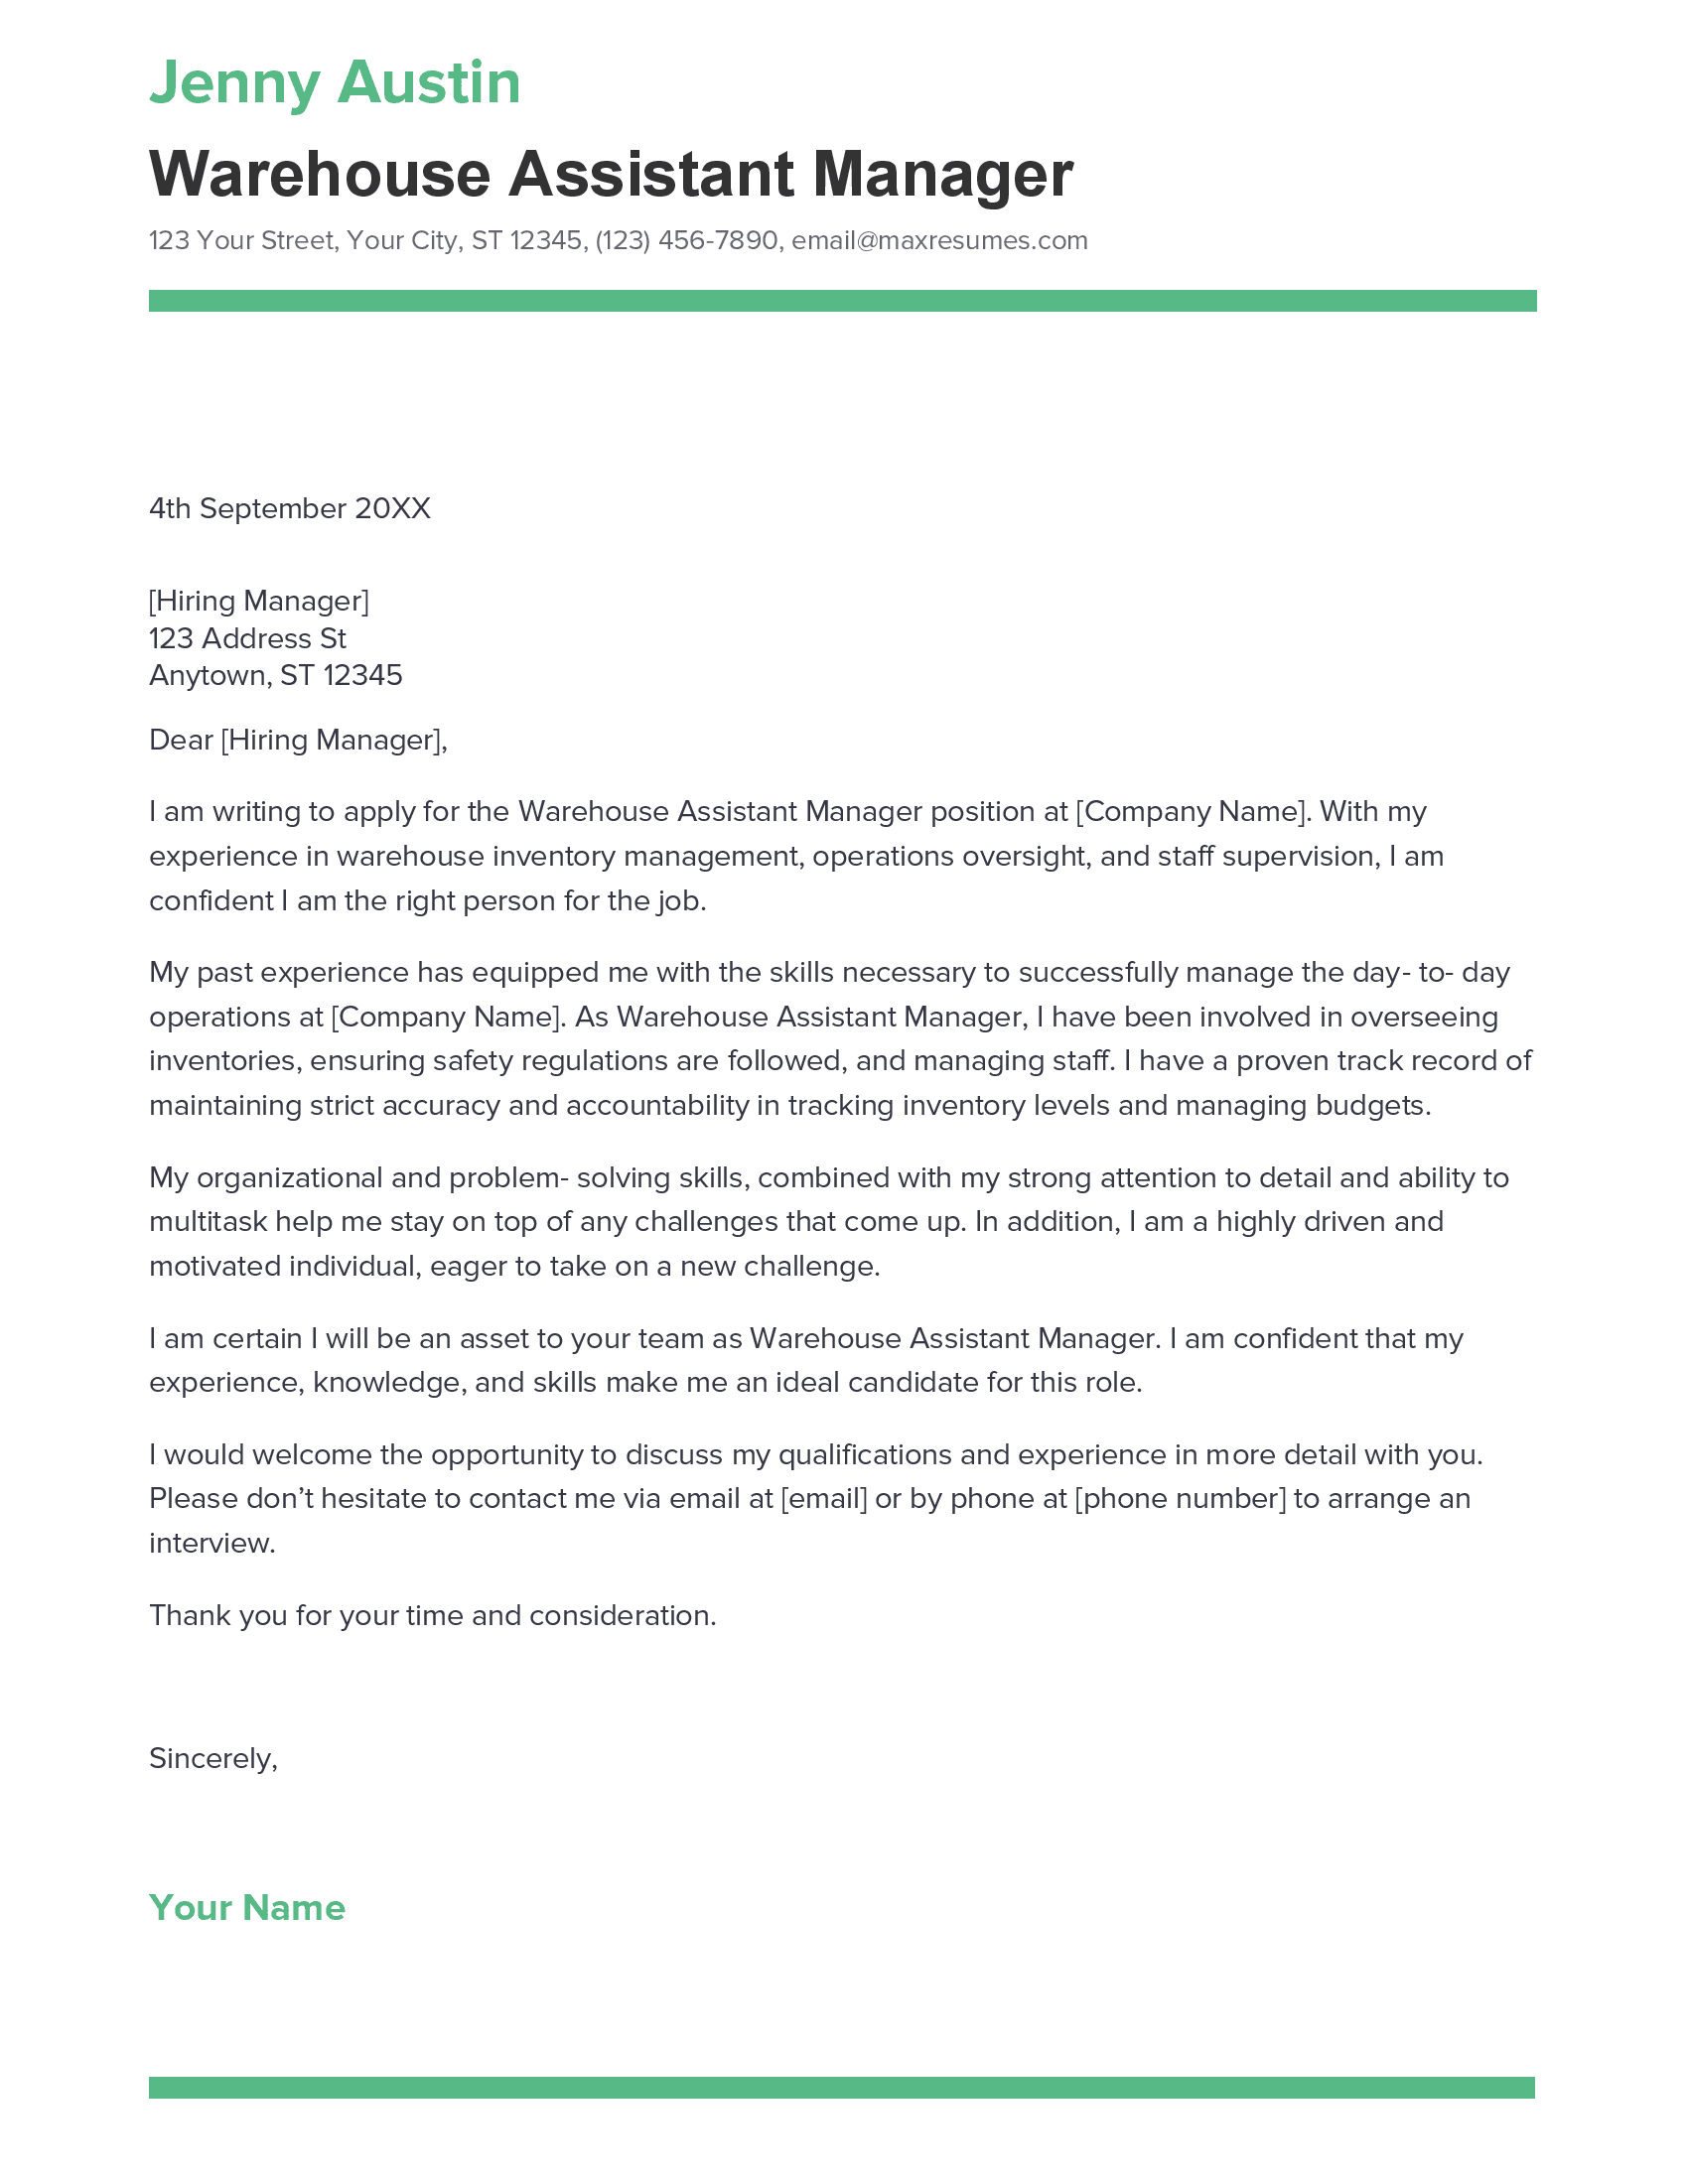 warehouse assistant cover letter sample